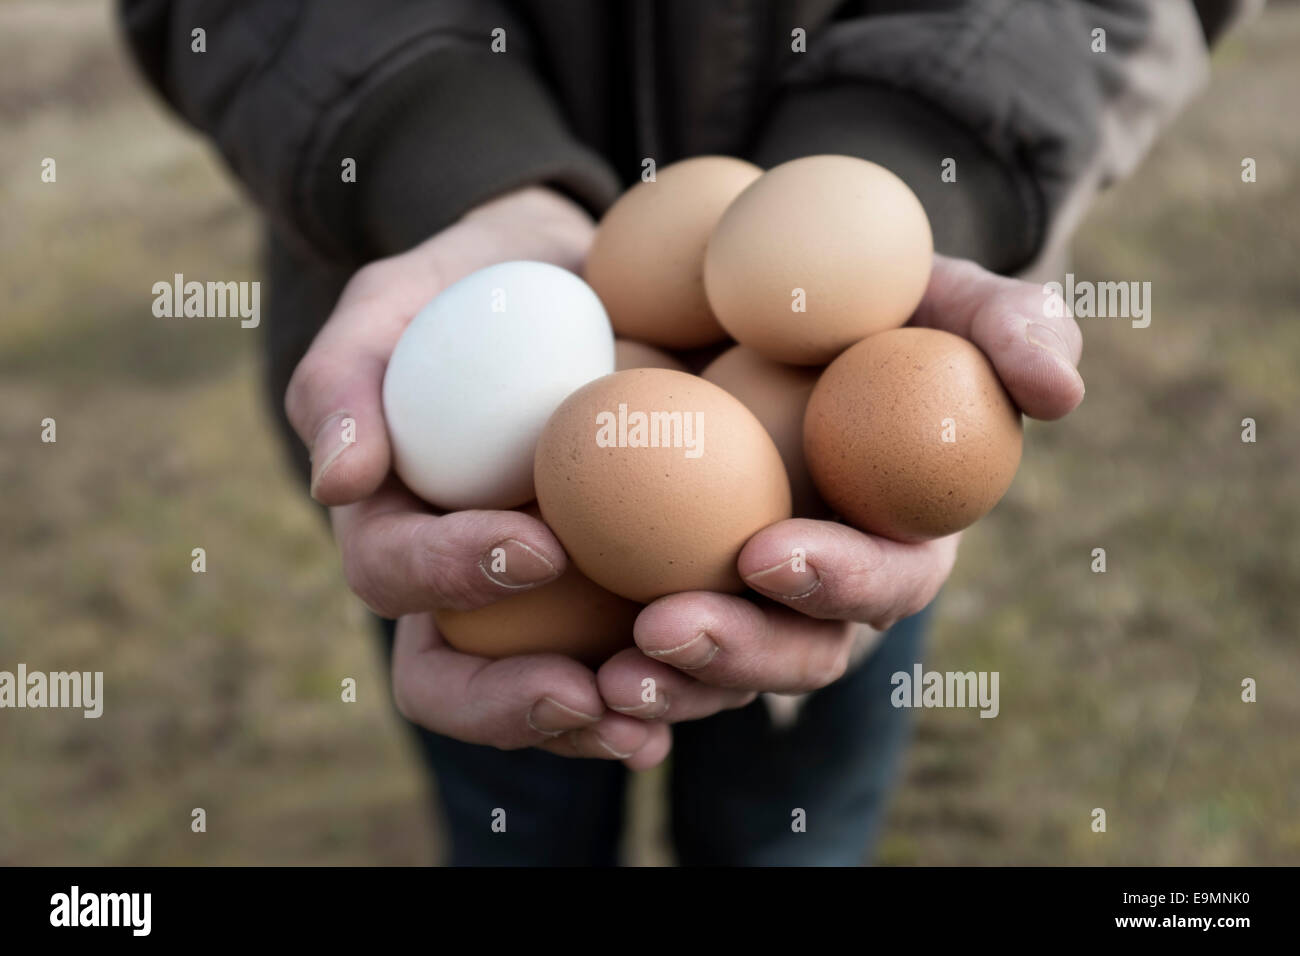 Cupped hands holding free range chicken eggs. Stock Photo